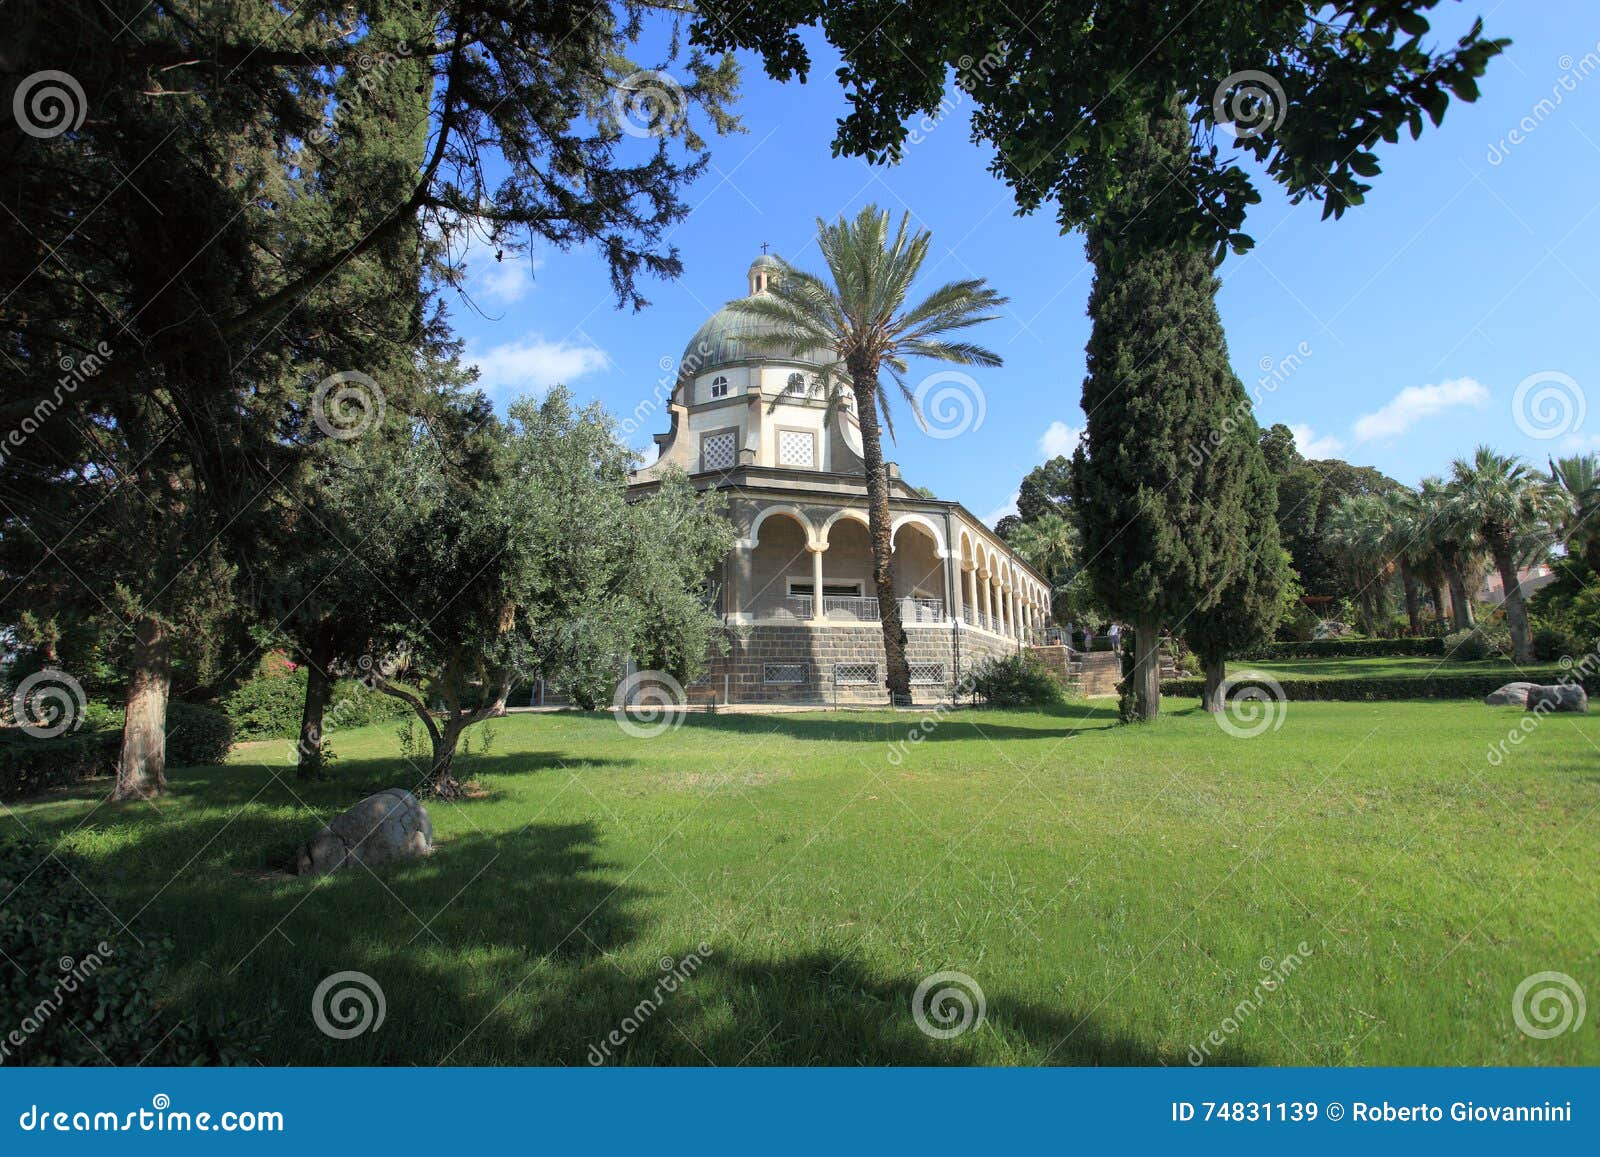 gardens and church of the beatitudes, israel